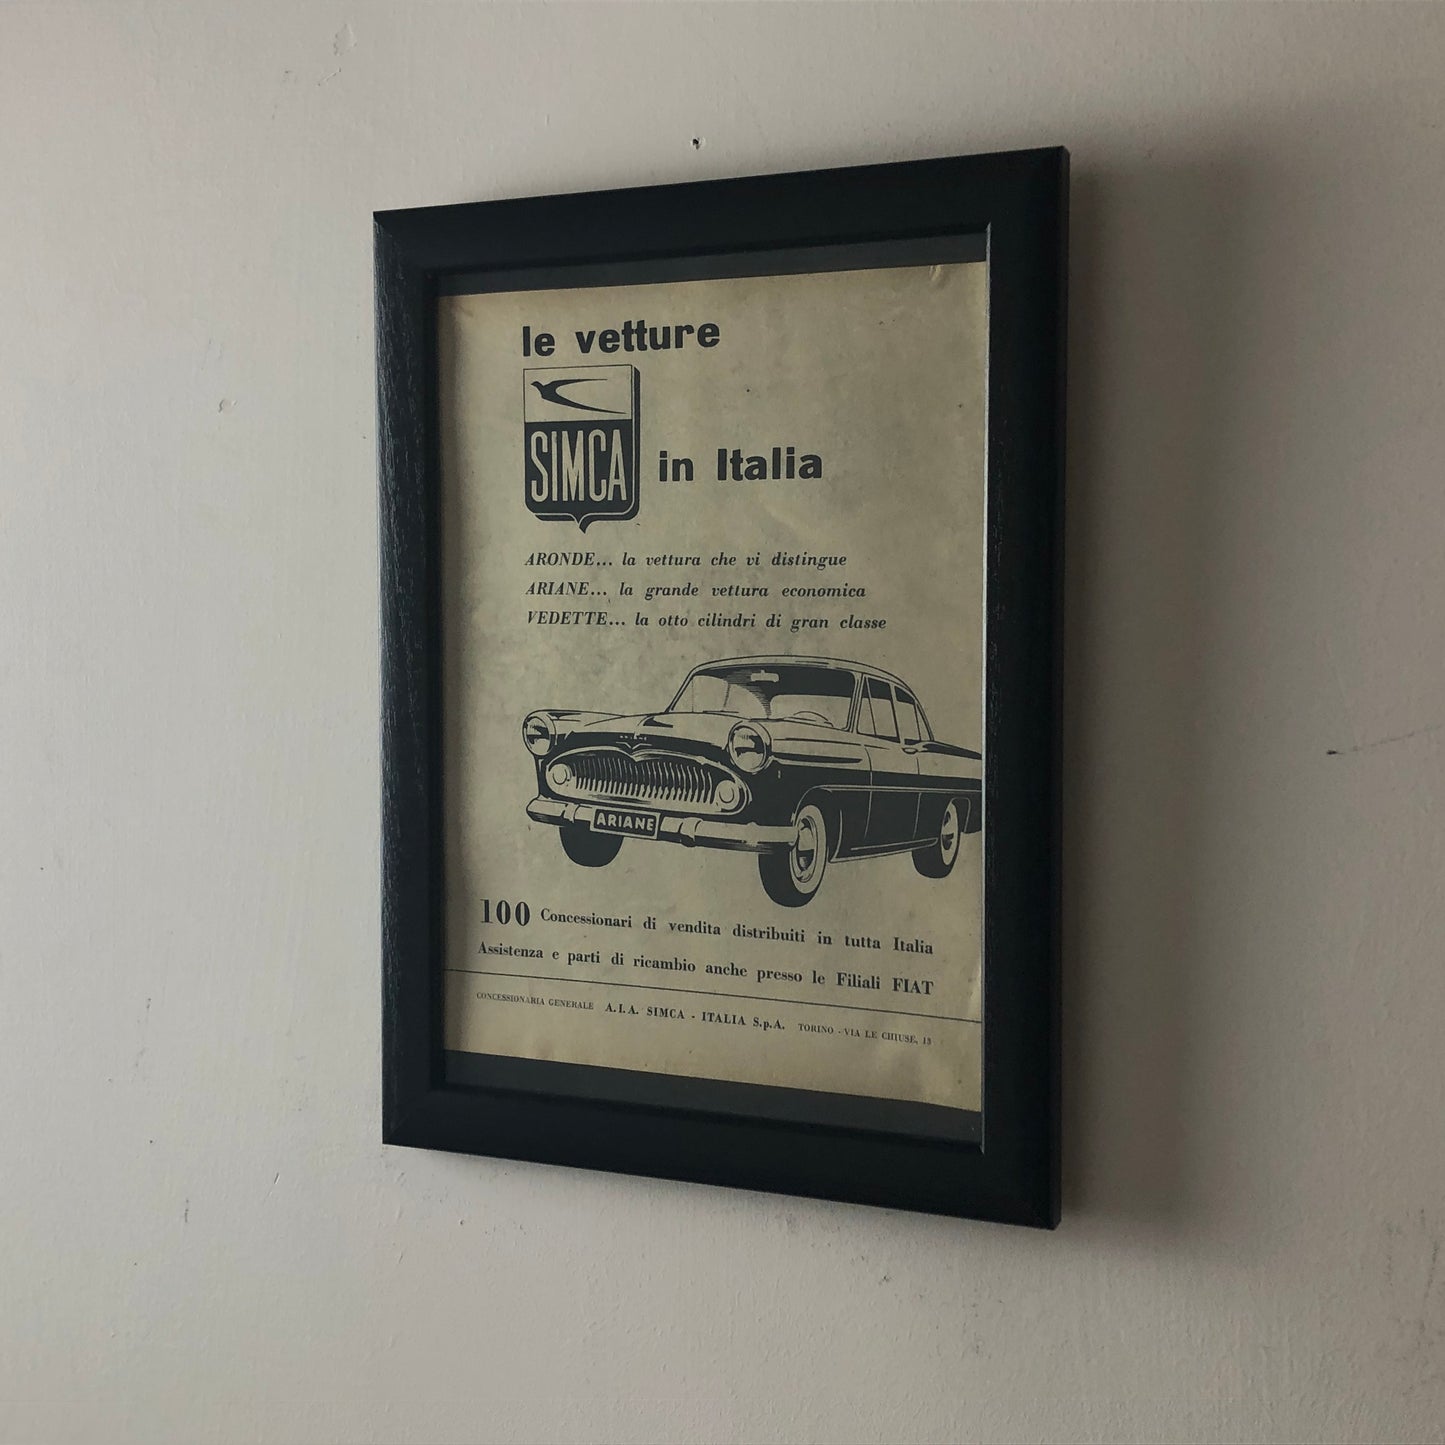 SIMCA, advertising year 1960 SIMCA the SIMCA cars in Italy, Aronde, Ariane, Vedette,